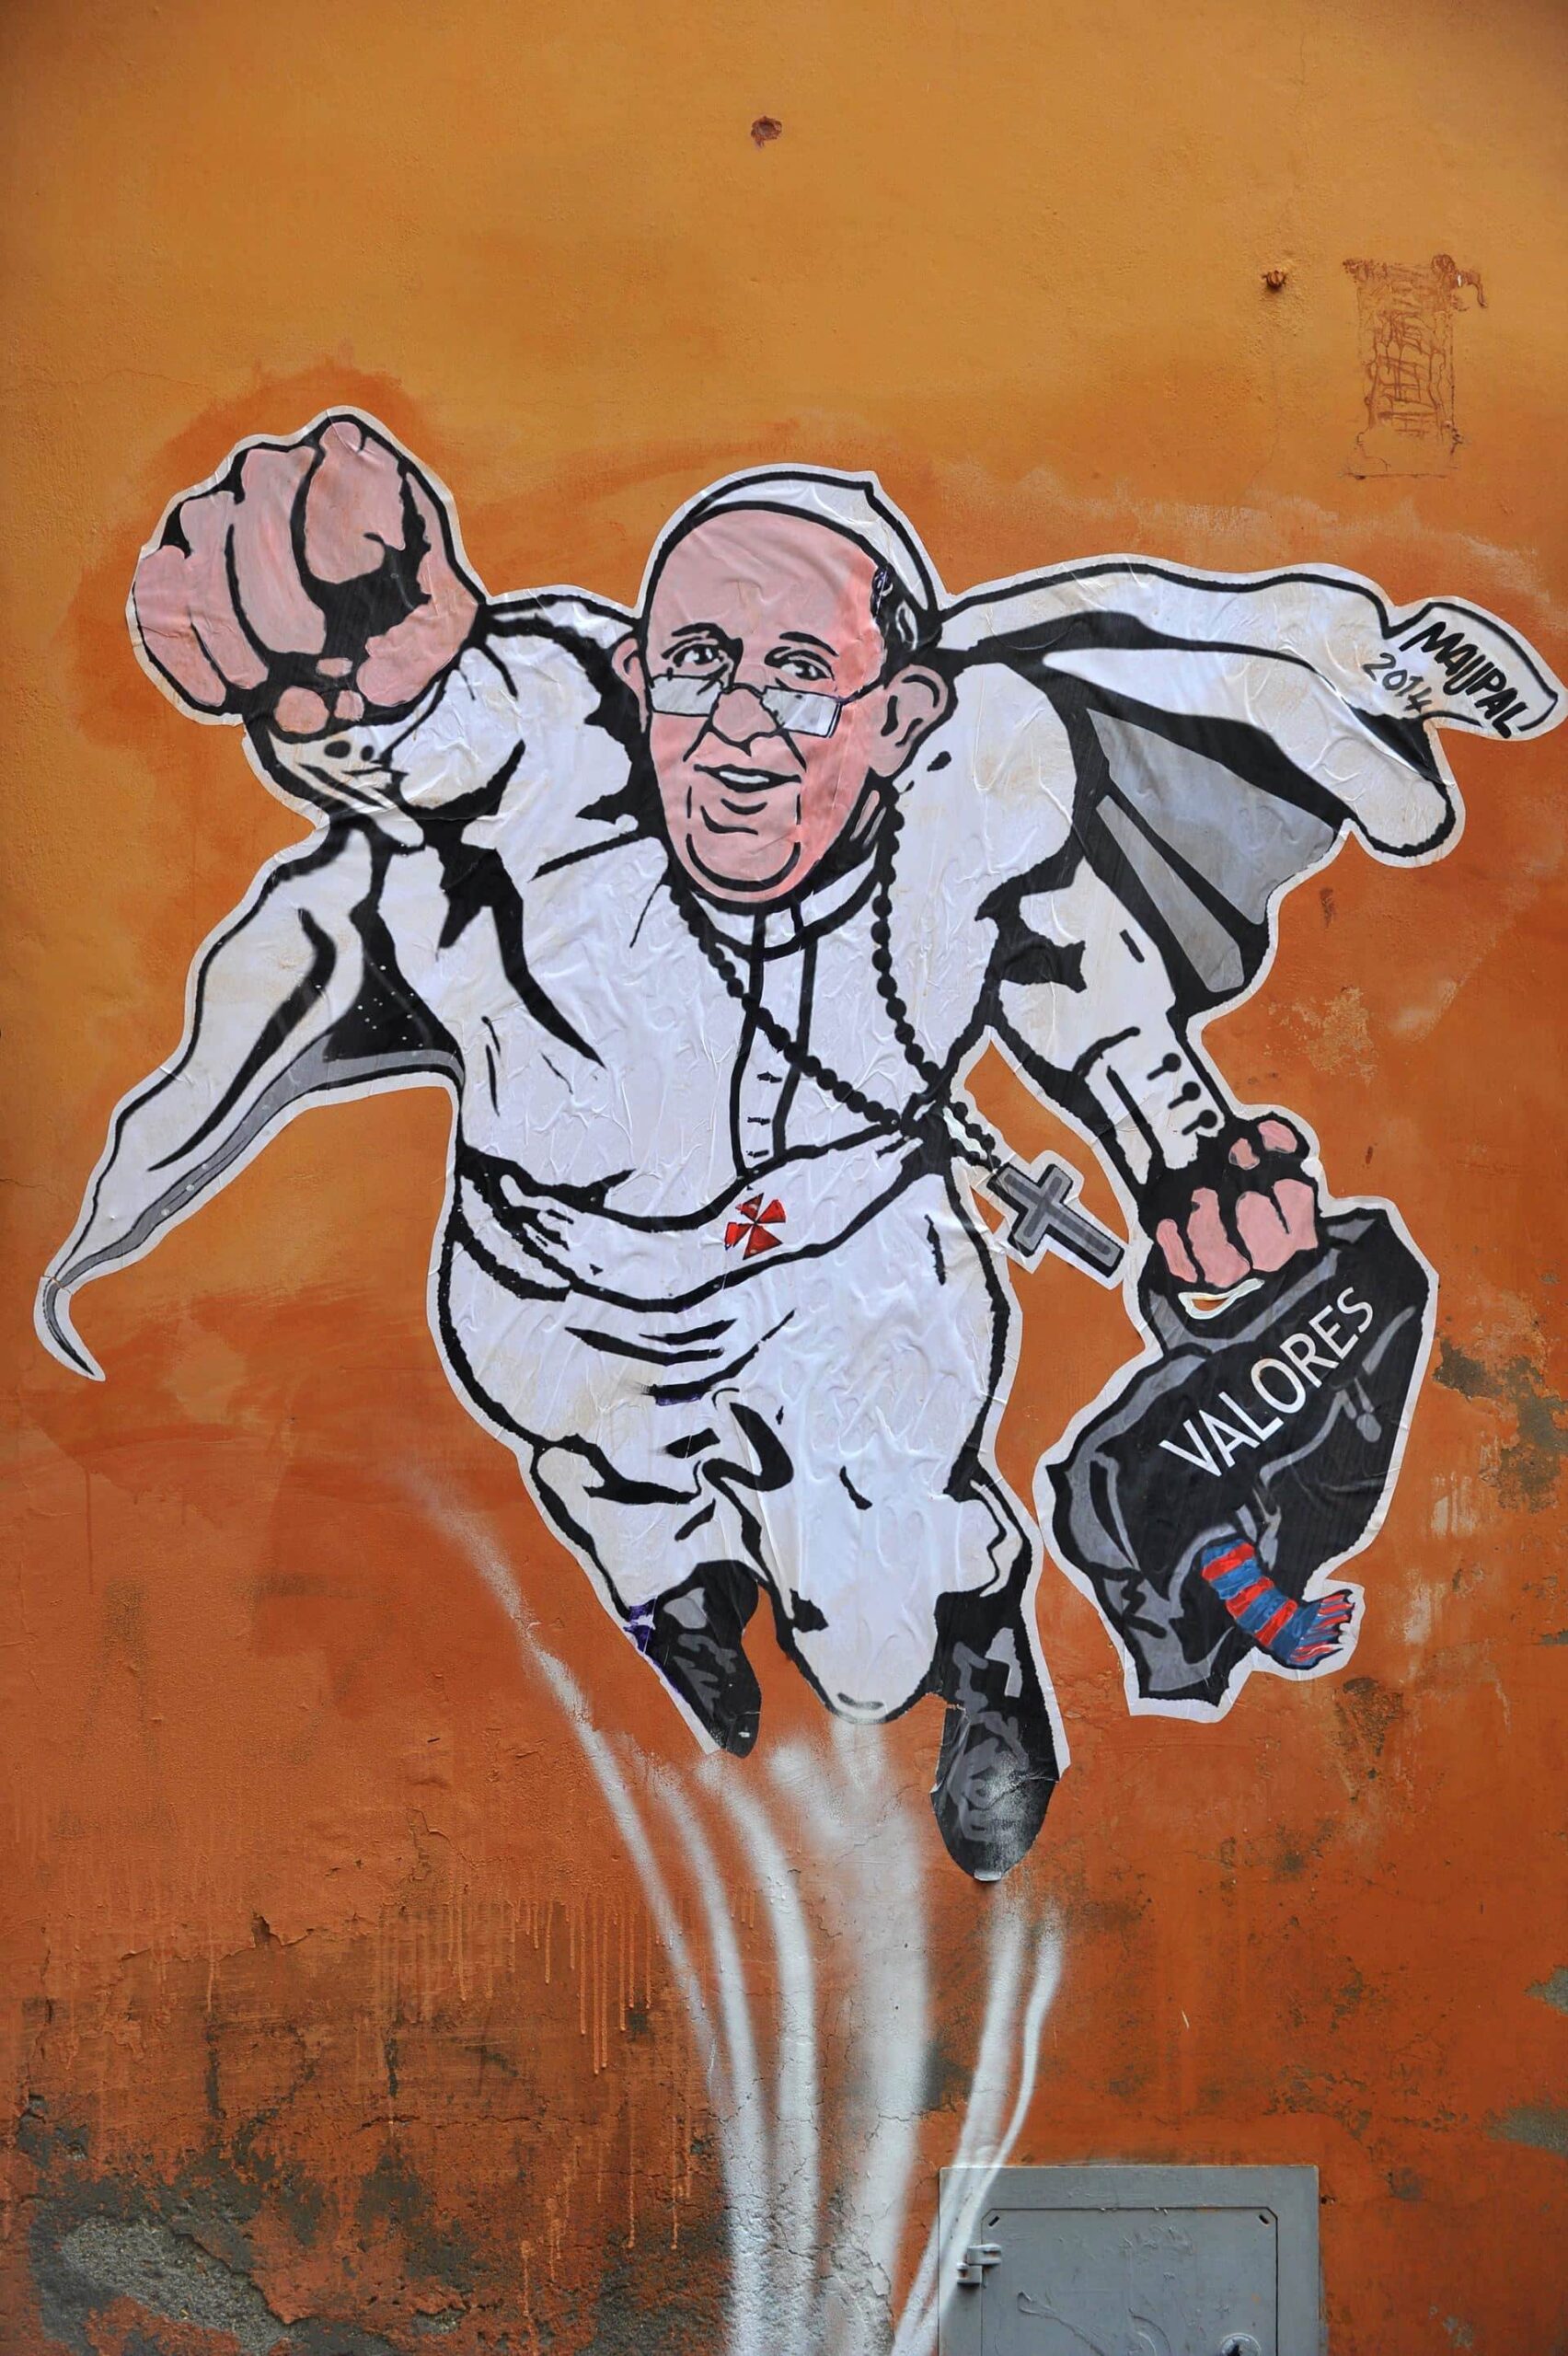 A picture shows a street art mural showing Pope Francis as a superman, flying through the air with his white papal cloak billowing out...
</p>
            <footer class=